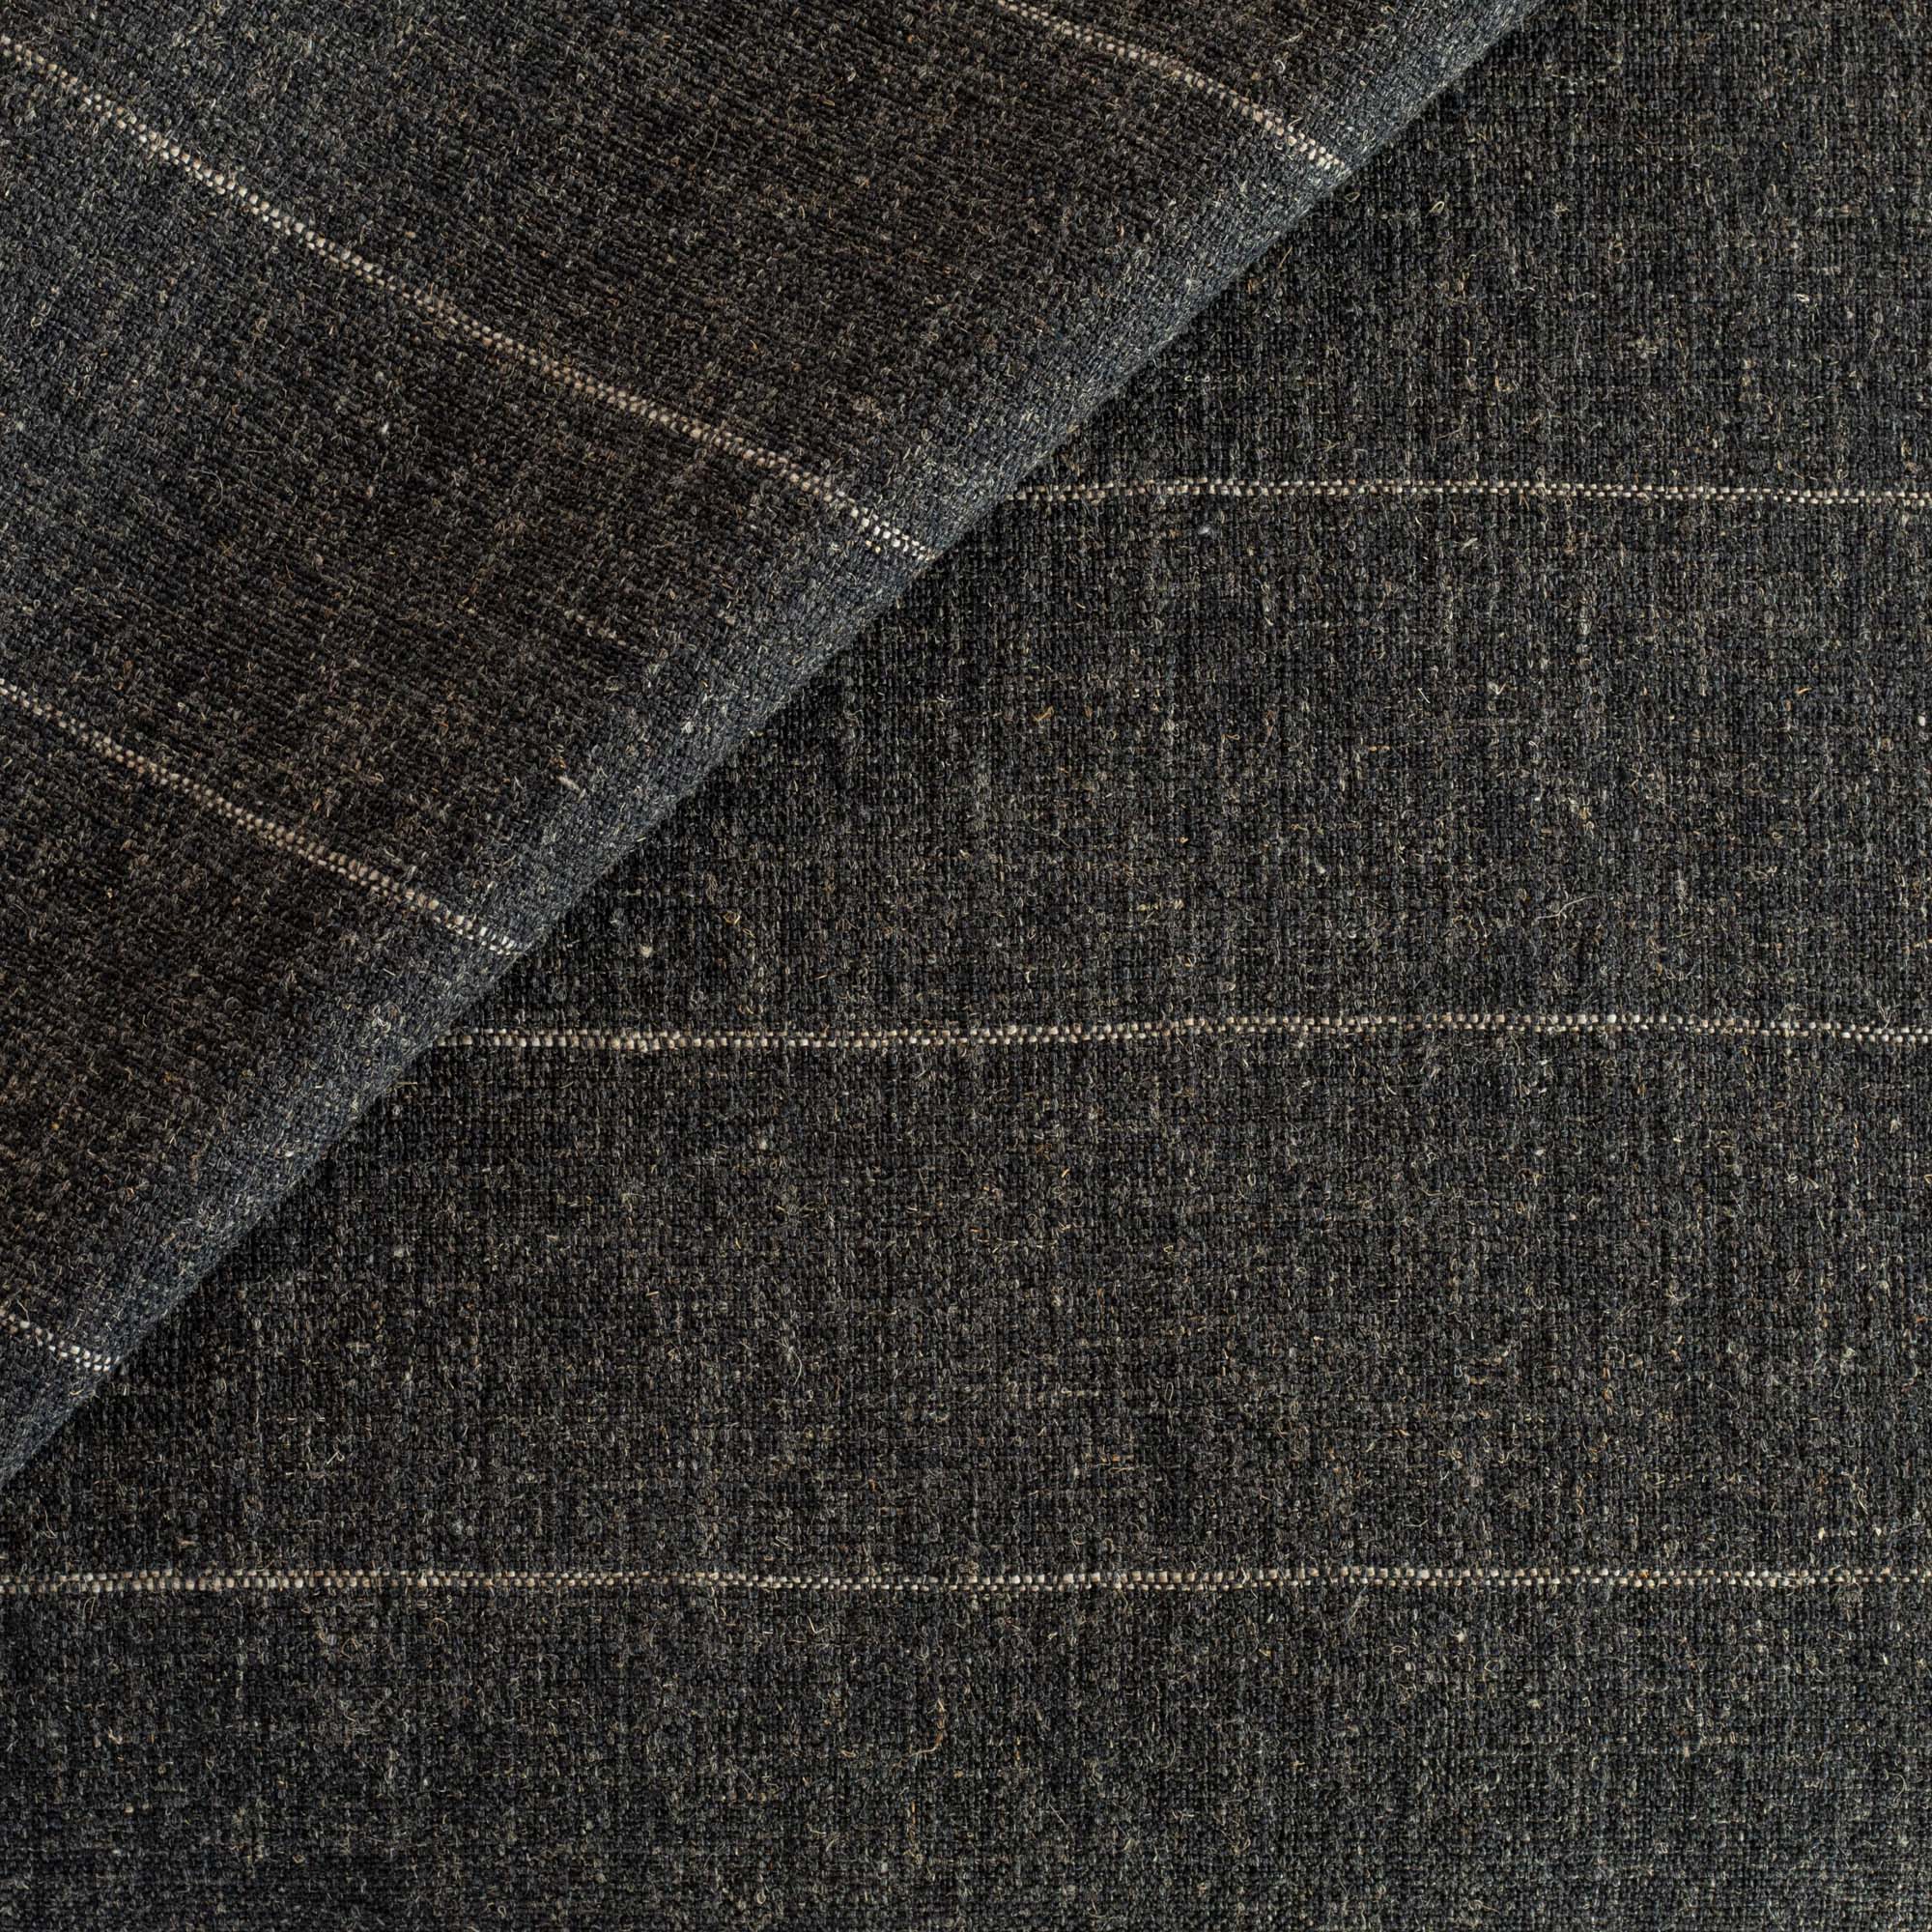 a wool like charcoal gray and brown stripe home decor fabric